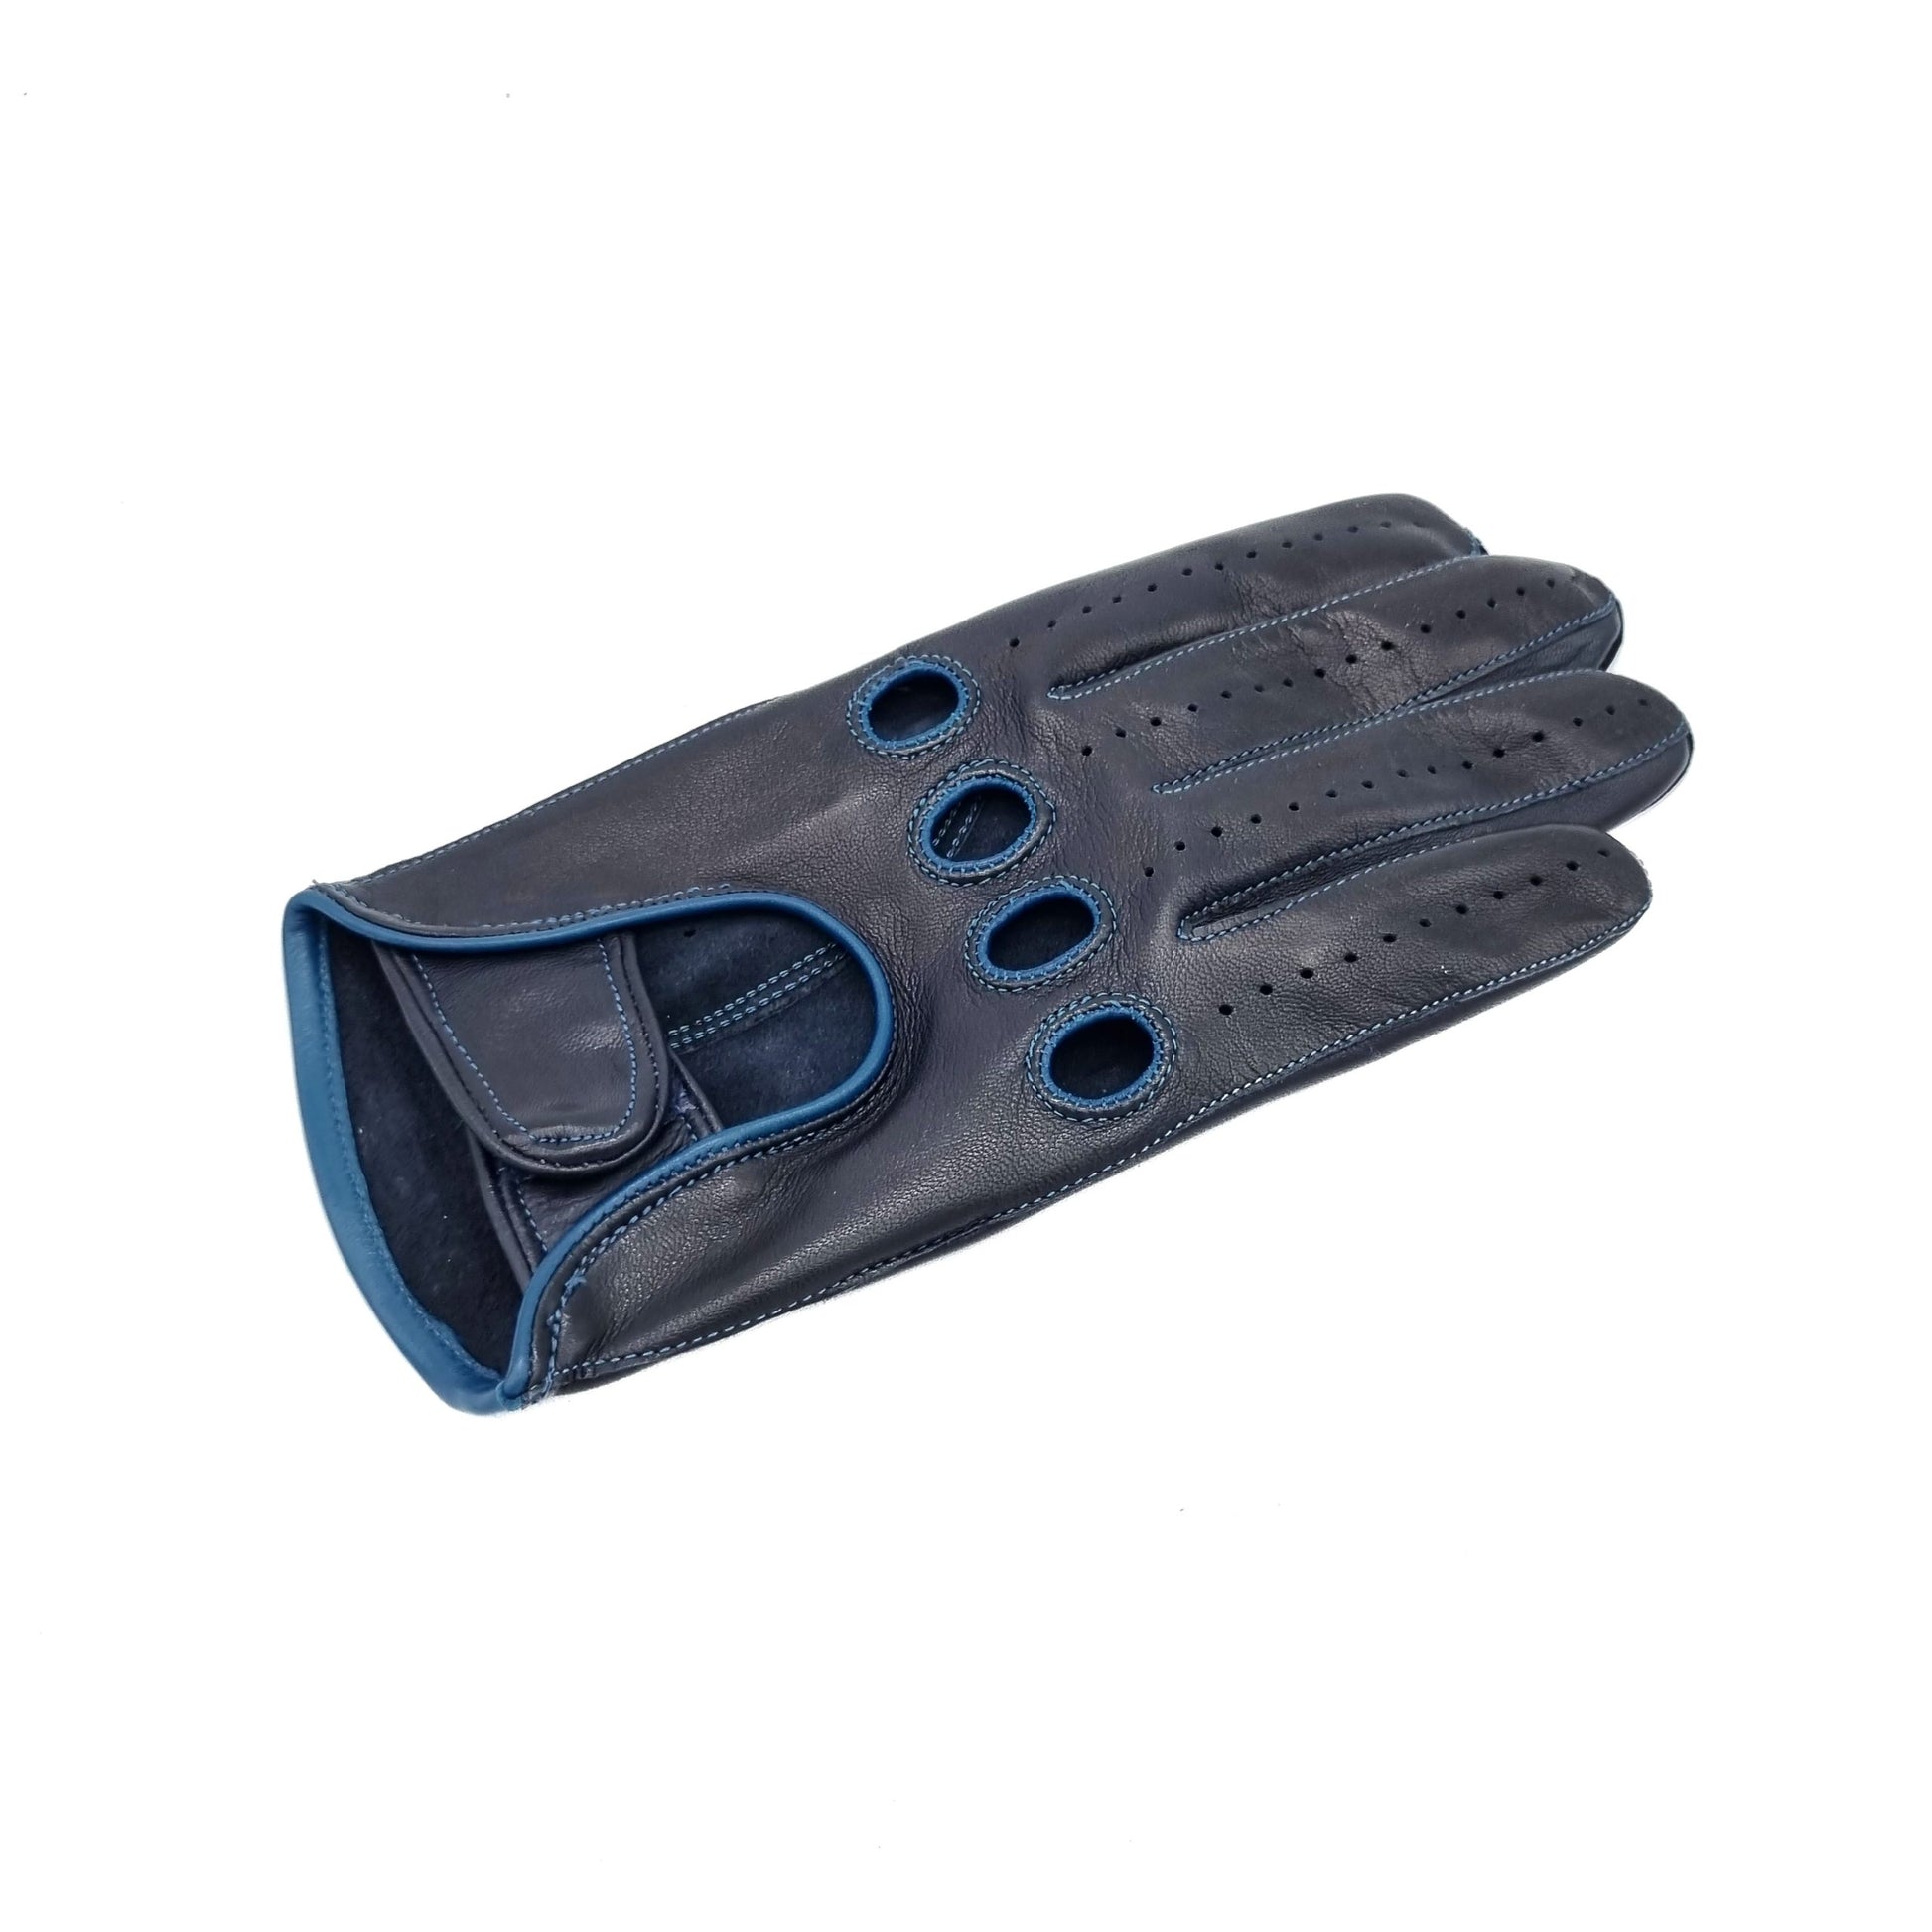 Men's blu leather driving gloves with strap closure